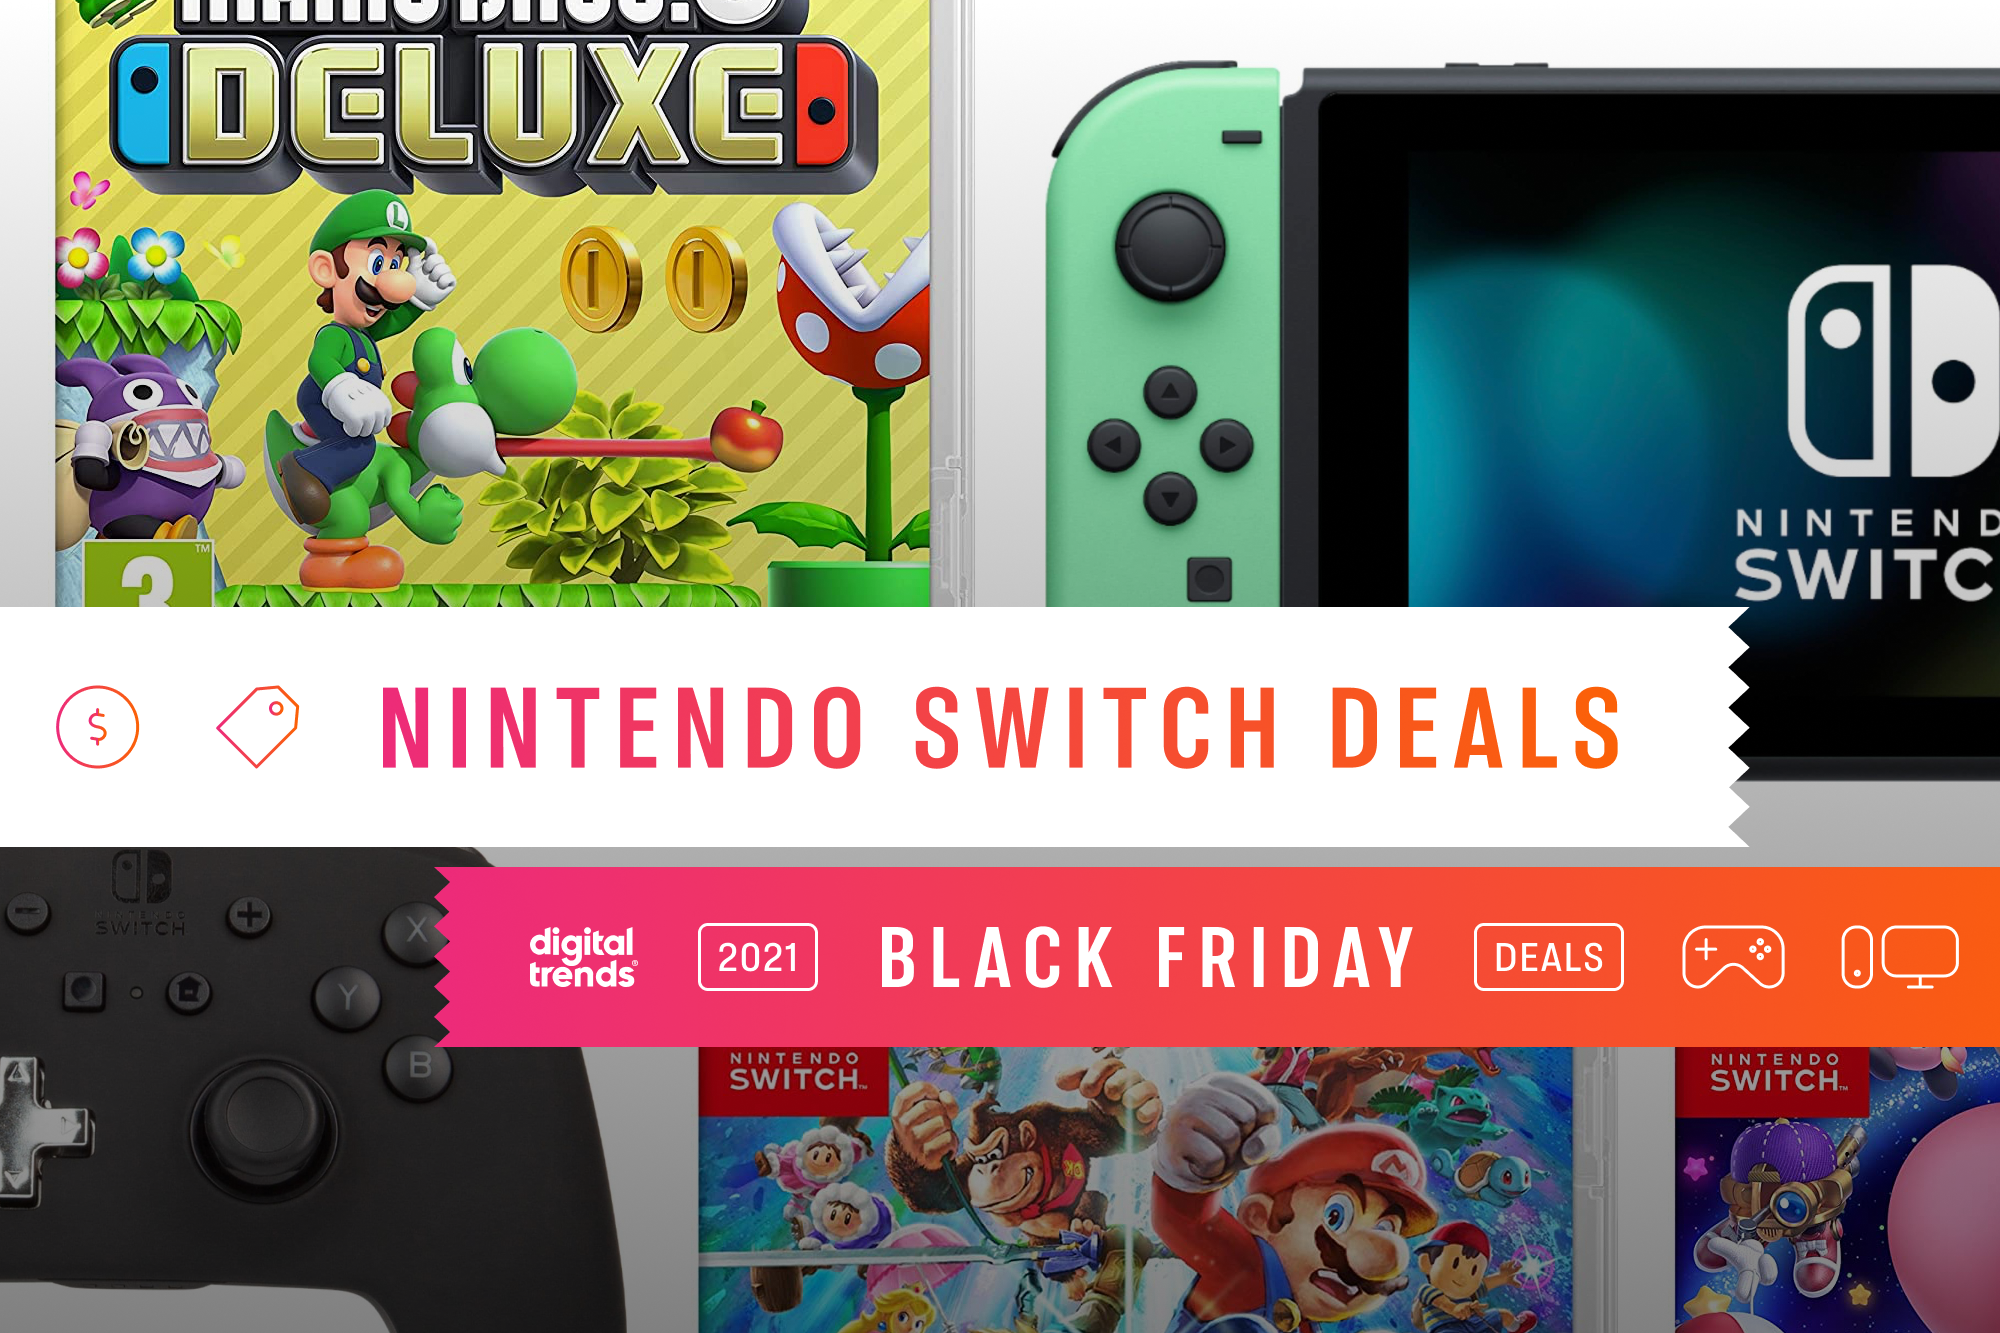 Nintendo Switch Black Friday Bundle Deal Available Soon, Comes